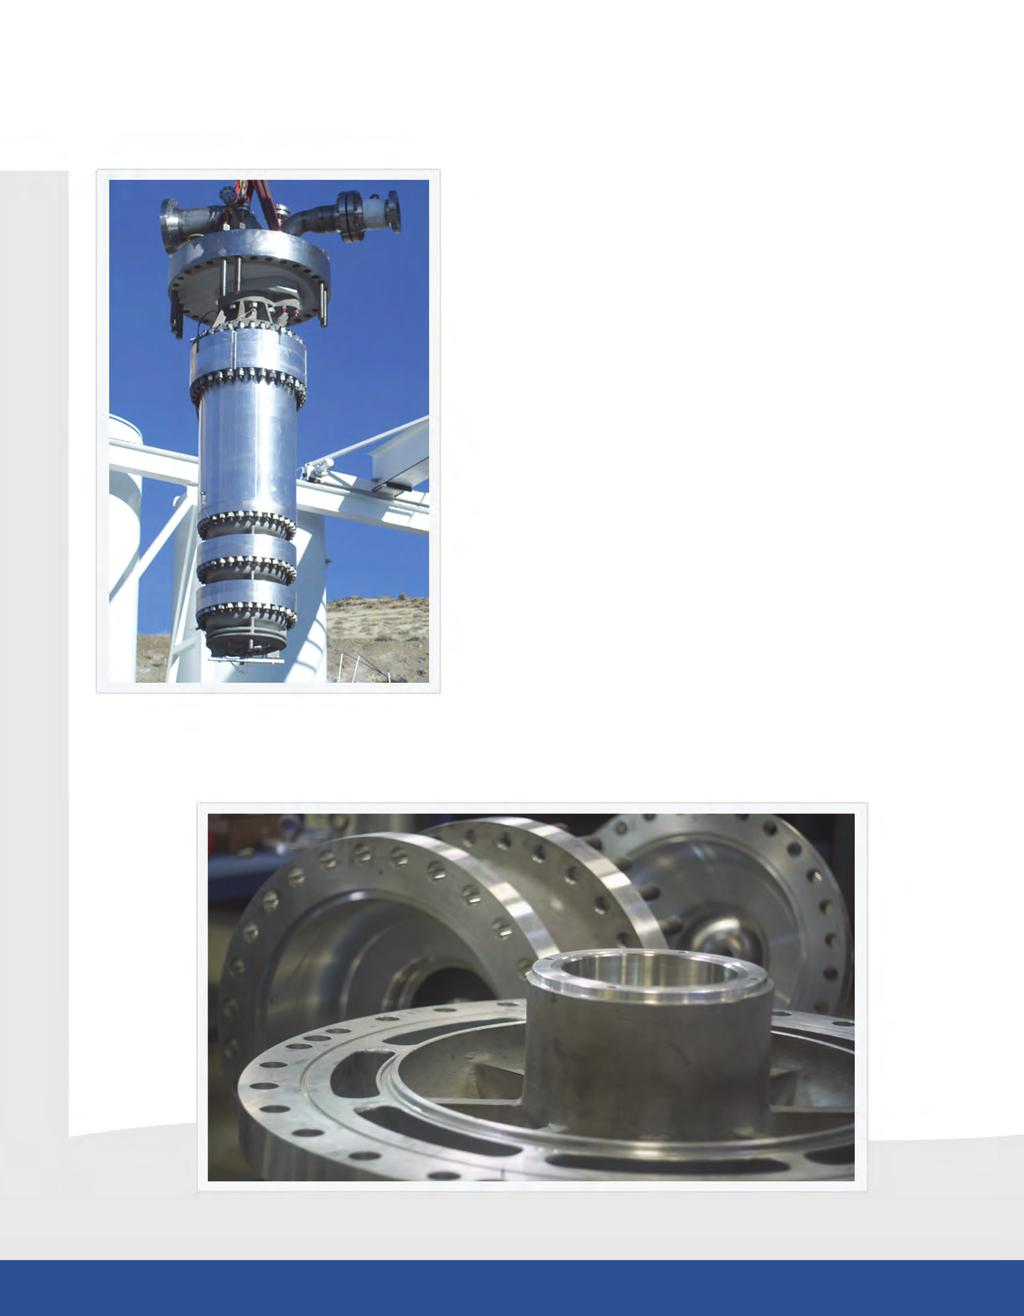 EXPANDERS THE EXPANDER REVOLUTION Ebara International, Cryodynamics division (EIC) has developed the world s first site-proven variable speed, liquefied gas expander and most recently, the first